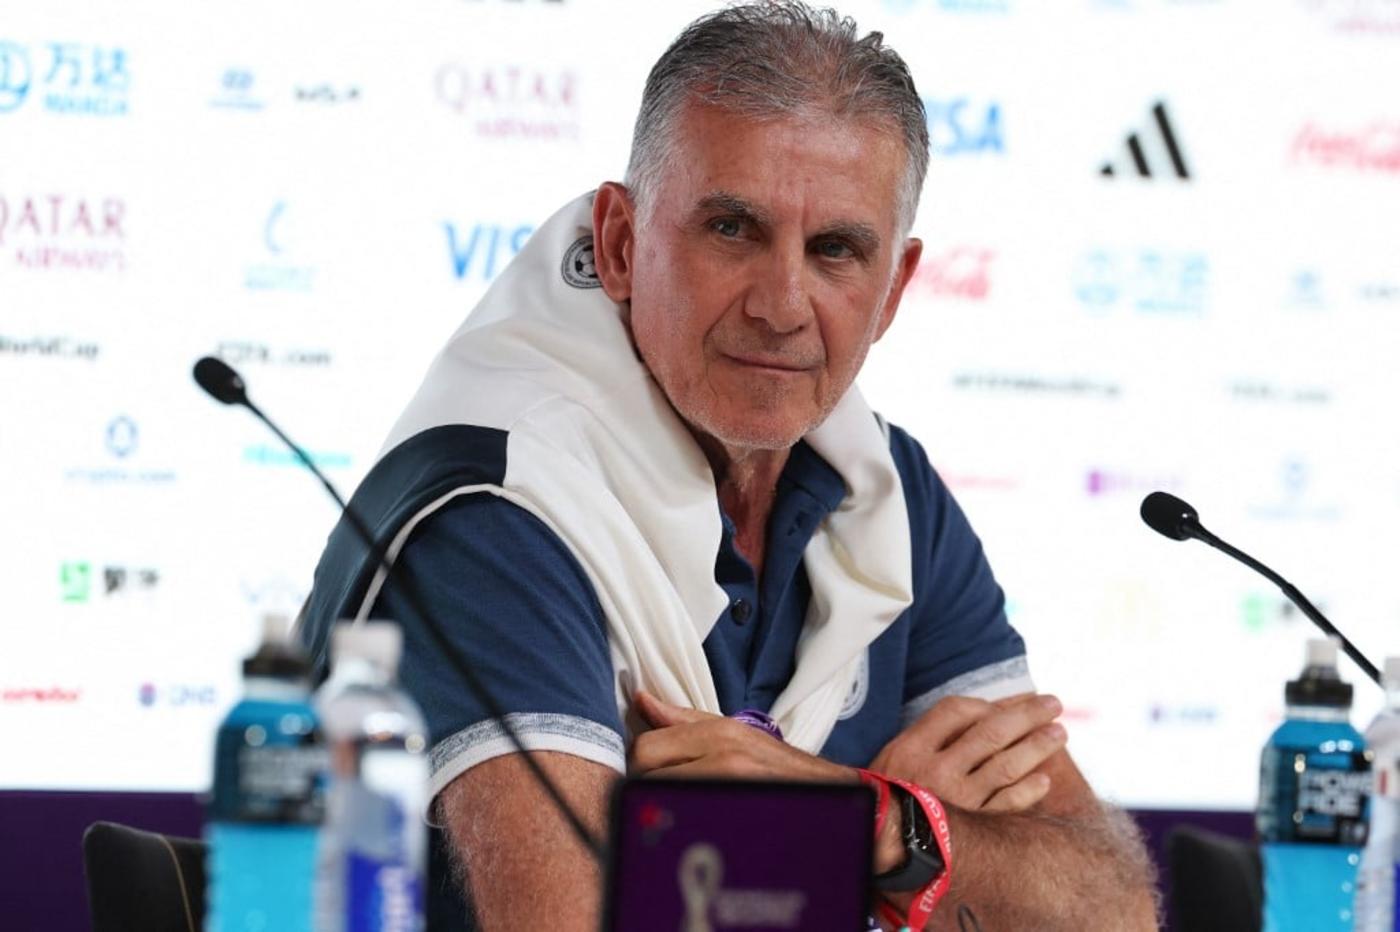 Iran's Portuguese head coach Carlos Queiroz attends a press conference in Doha on 24 November 2022, on the eve of the match between Wales and Iran (AFP)